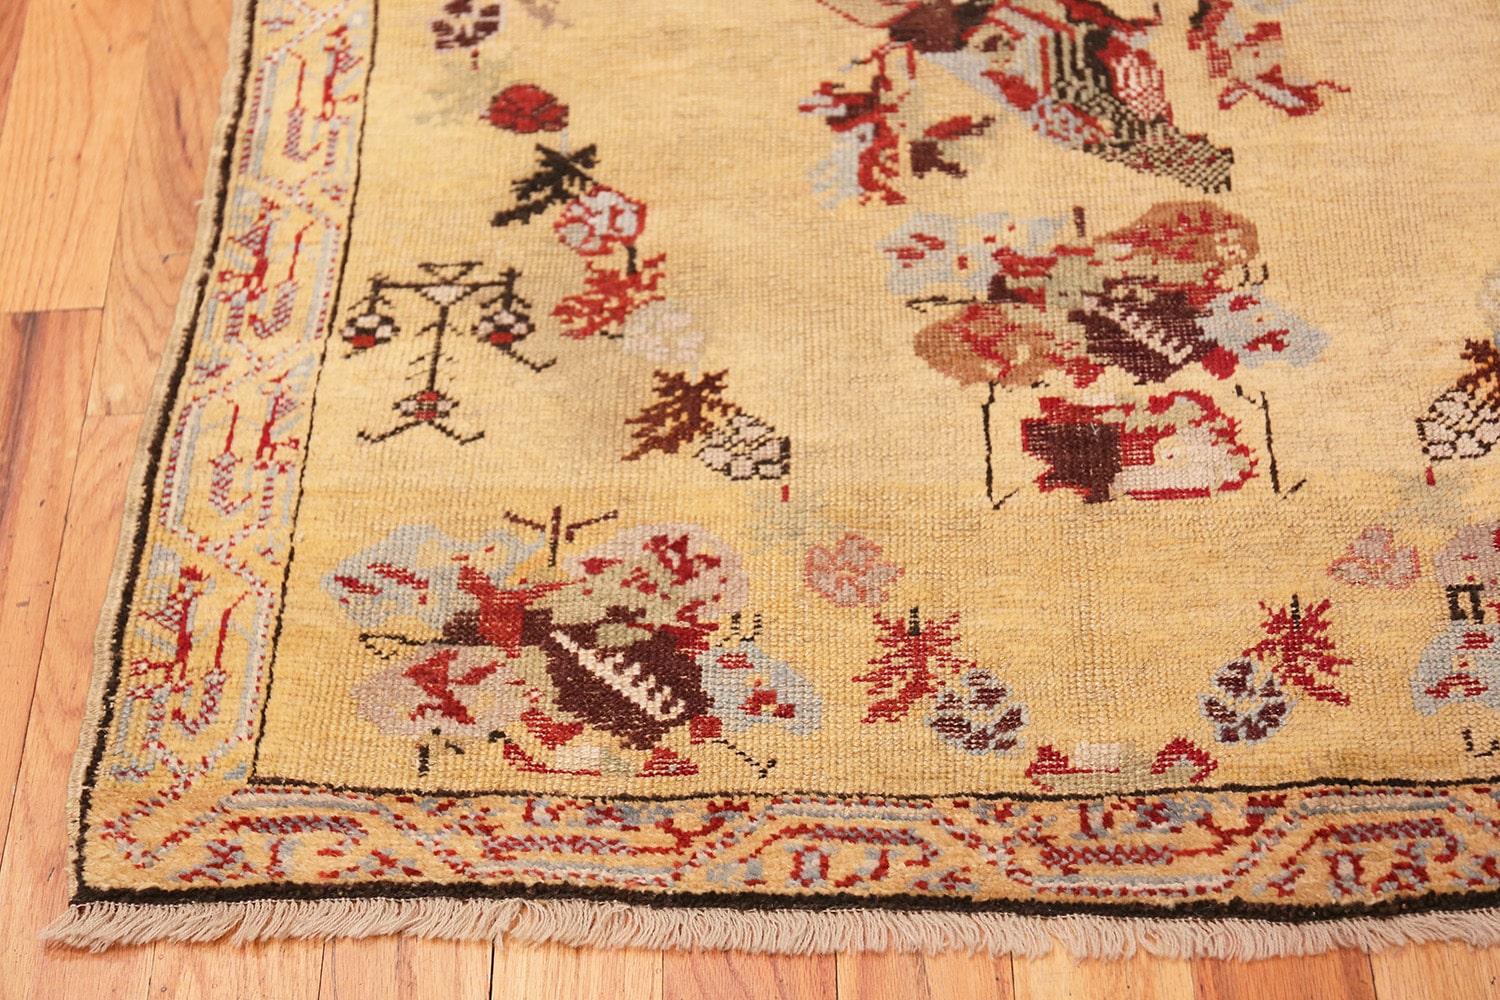 Wool Antique Turkish Ghiordes Carpet. Size: 3 ft 4 in x 5 ft For Sale